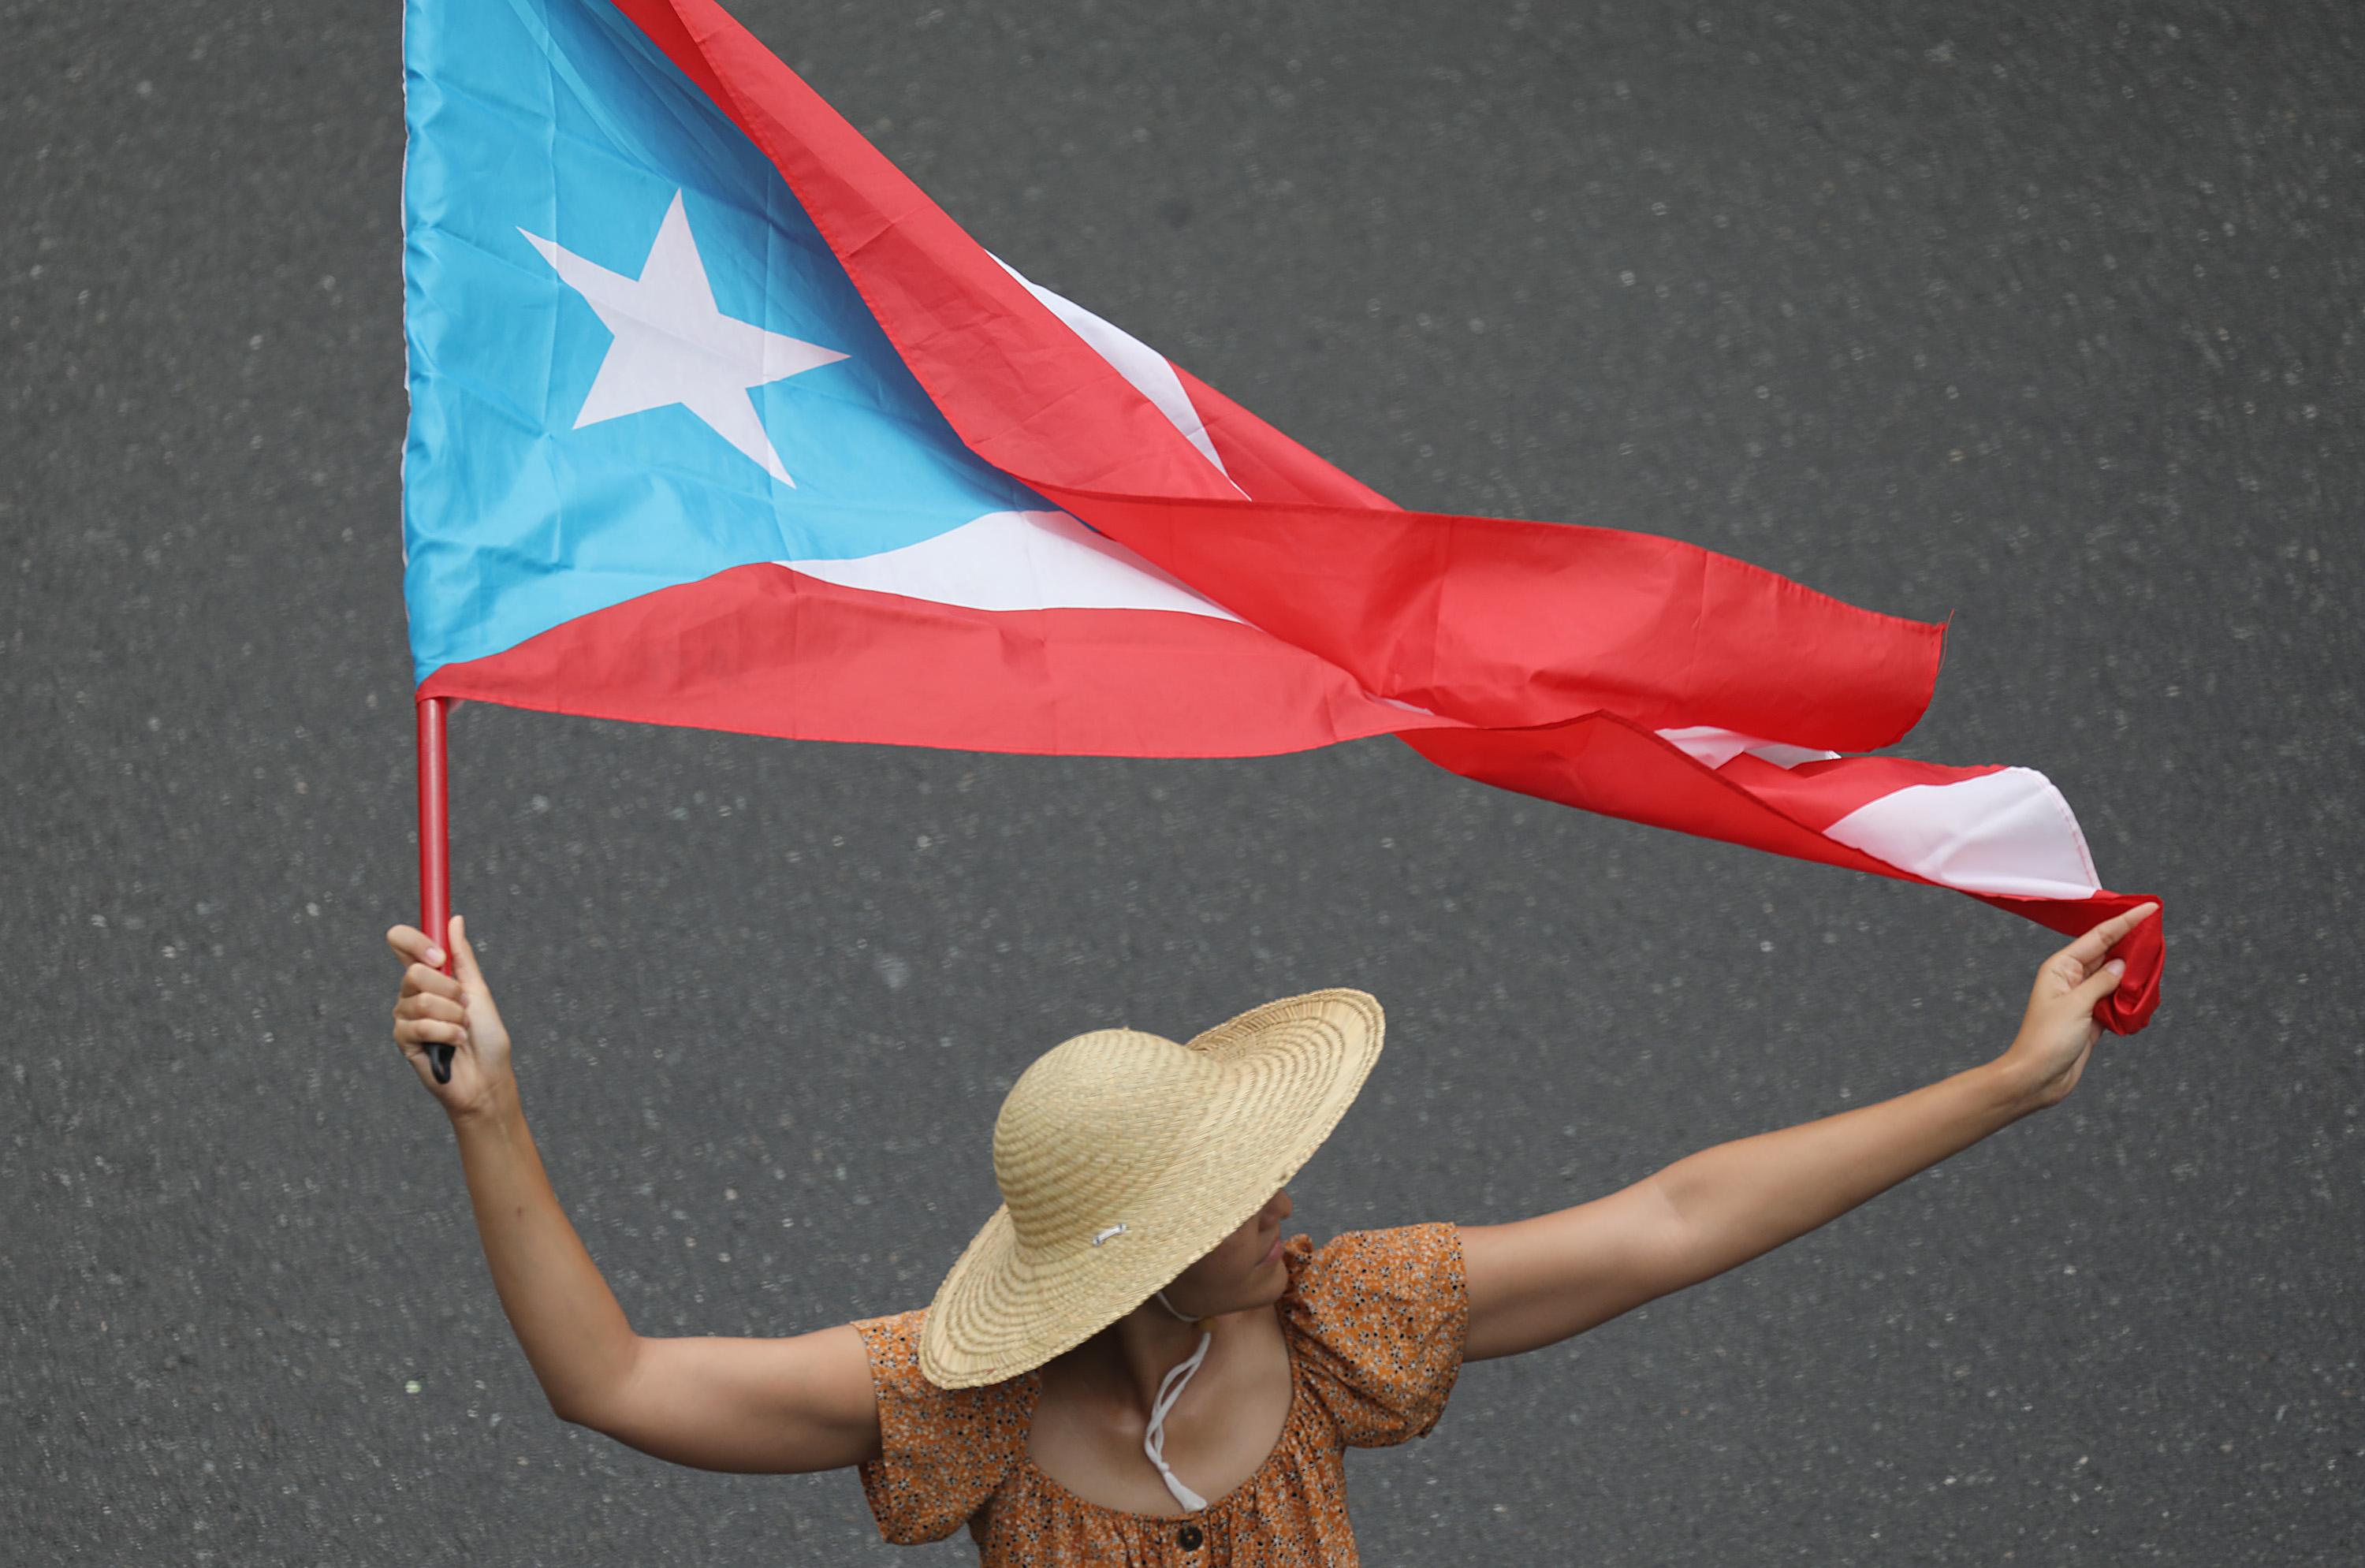 3000x1989 Puerto Rico Statehood Will Help Protect Democracy in the Region | Opini